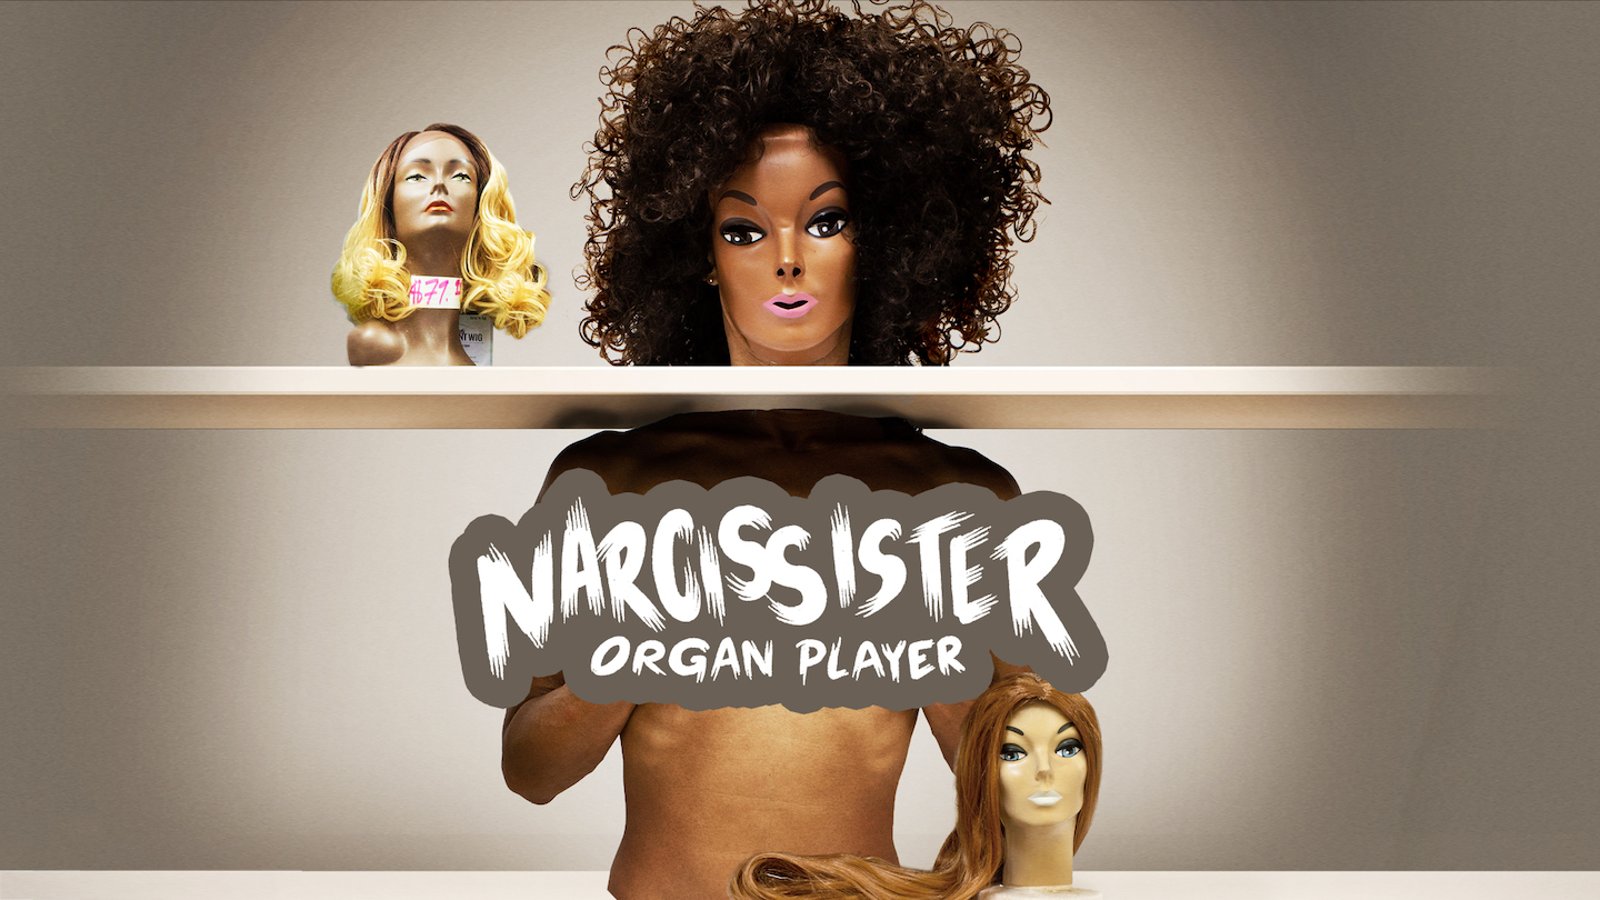 Narcissister Organ Player - A Contemporary Performance Artist Explores Gender, Racial Identity, and Sexuality